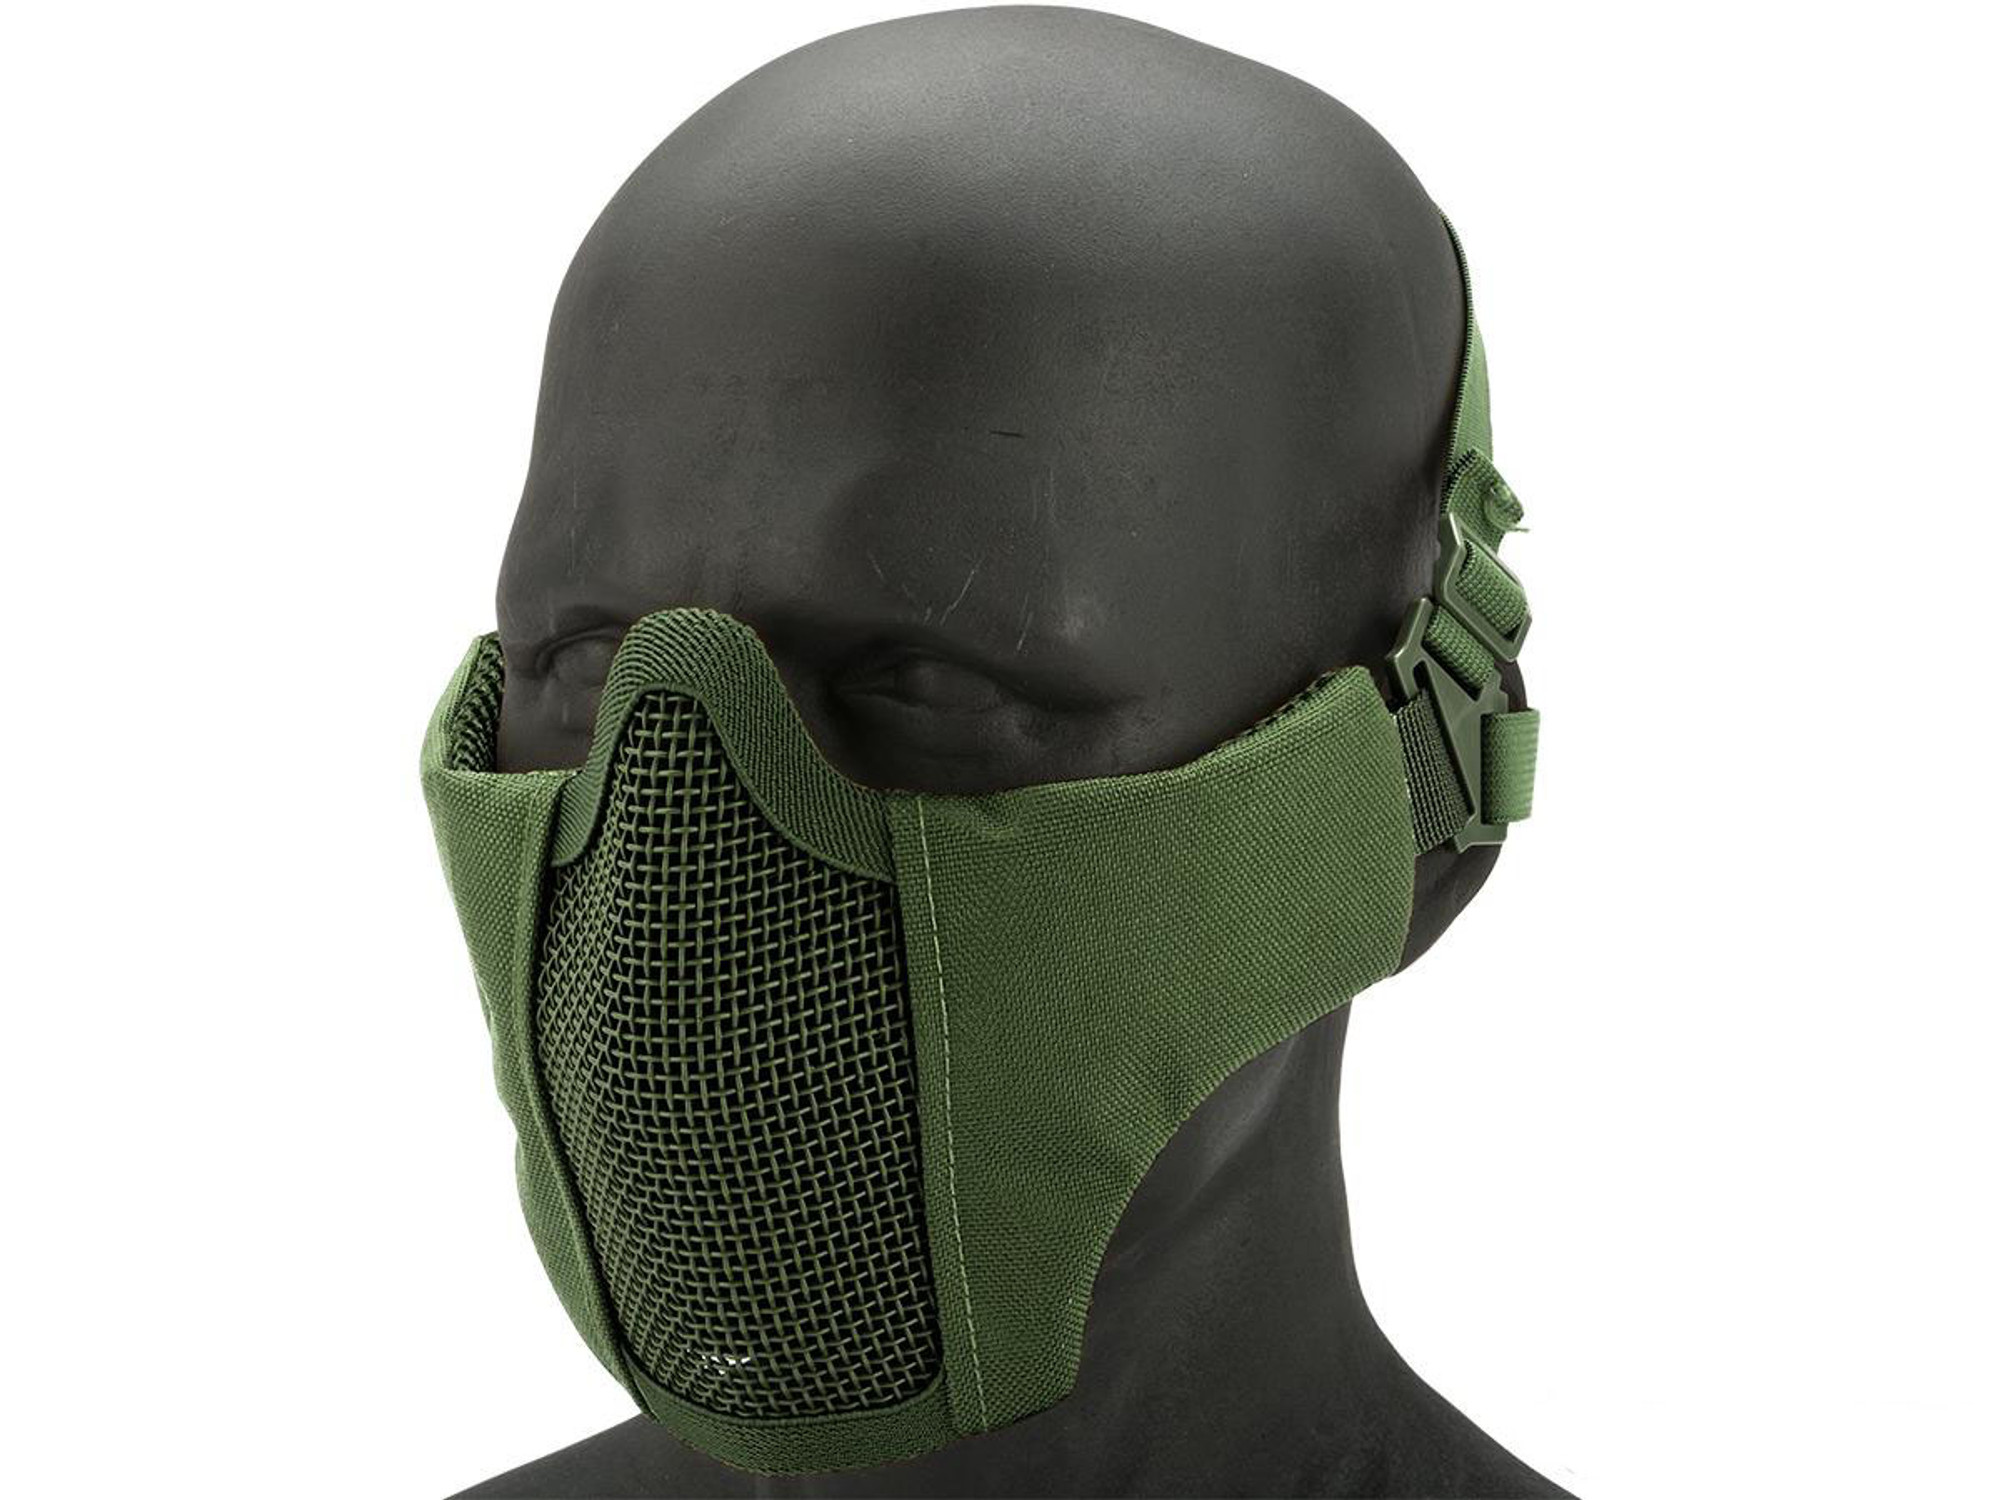 Matrix Low Profile Iron Face Padded Lower Half Face Mask (Color: OD)